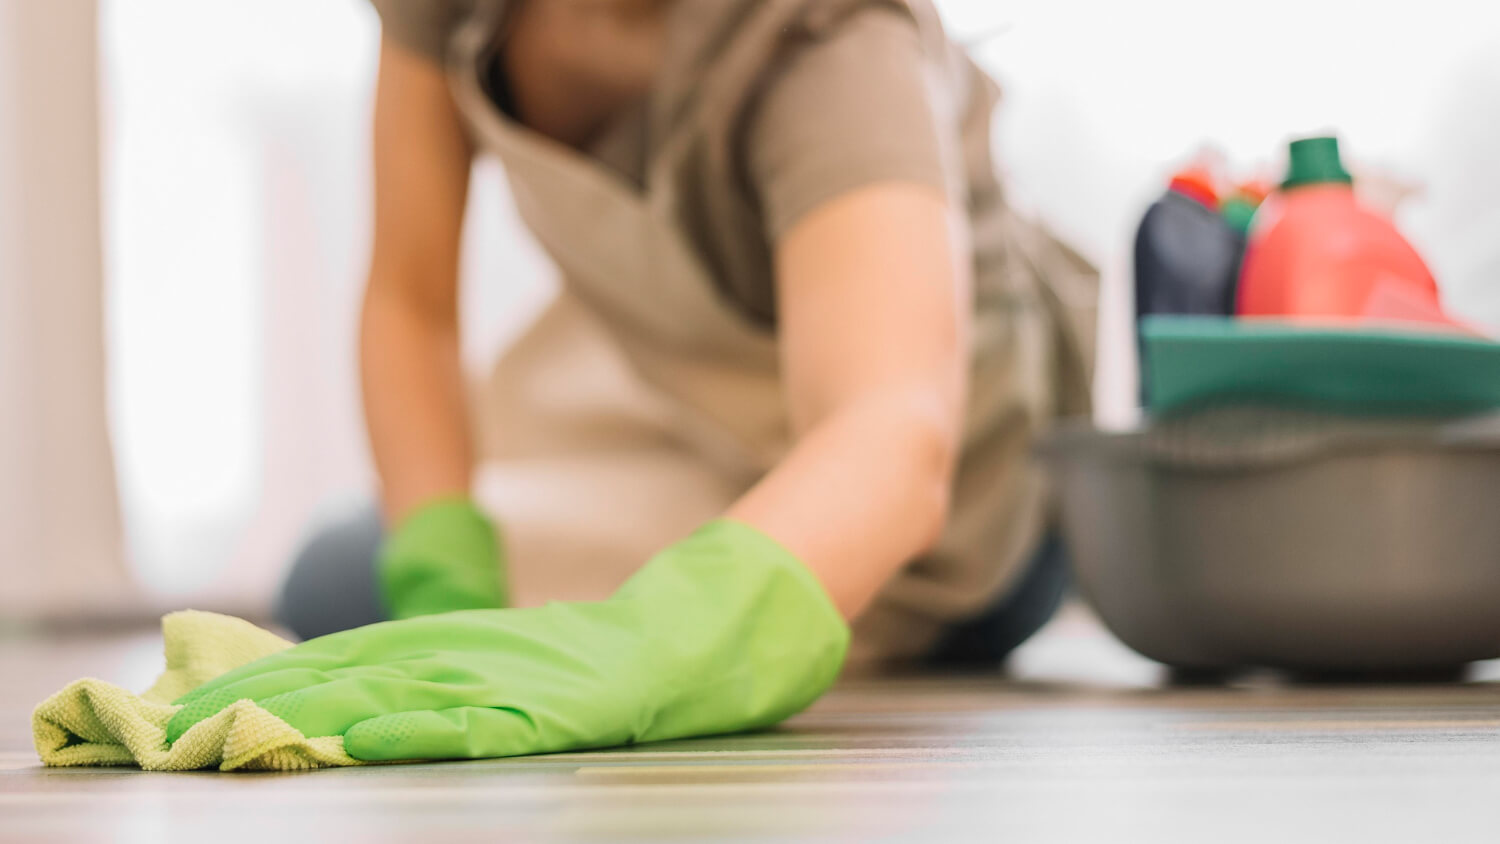 female cleaner in uniform close up cleaning floor in green gloves with yellow cloth and cleaning equipment next to her